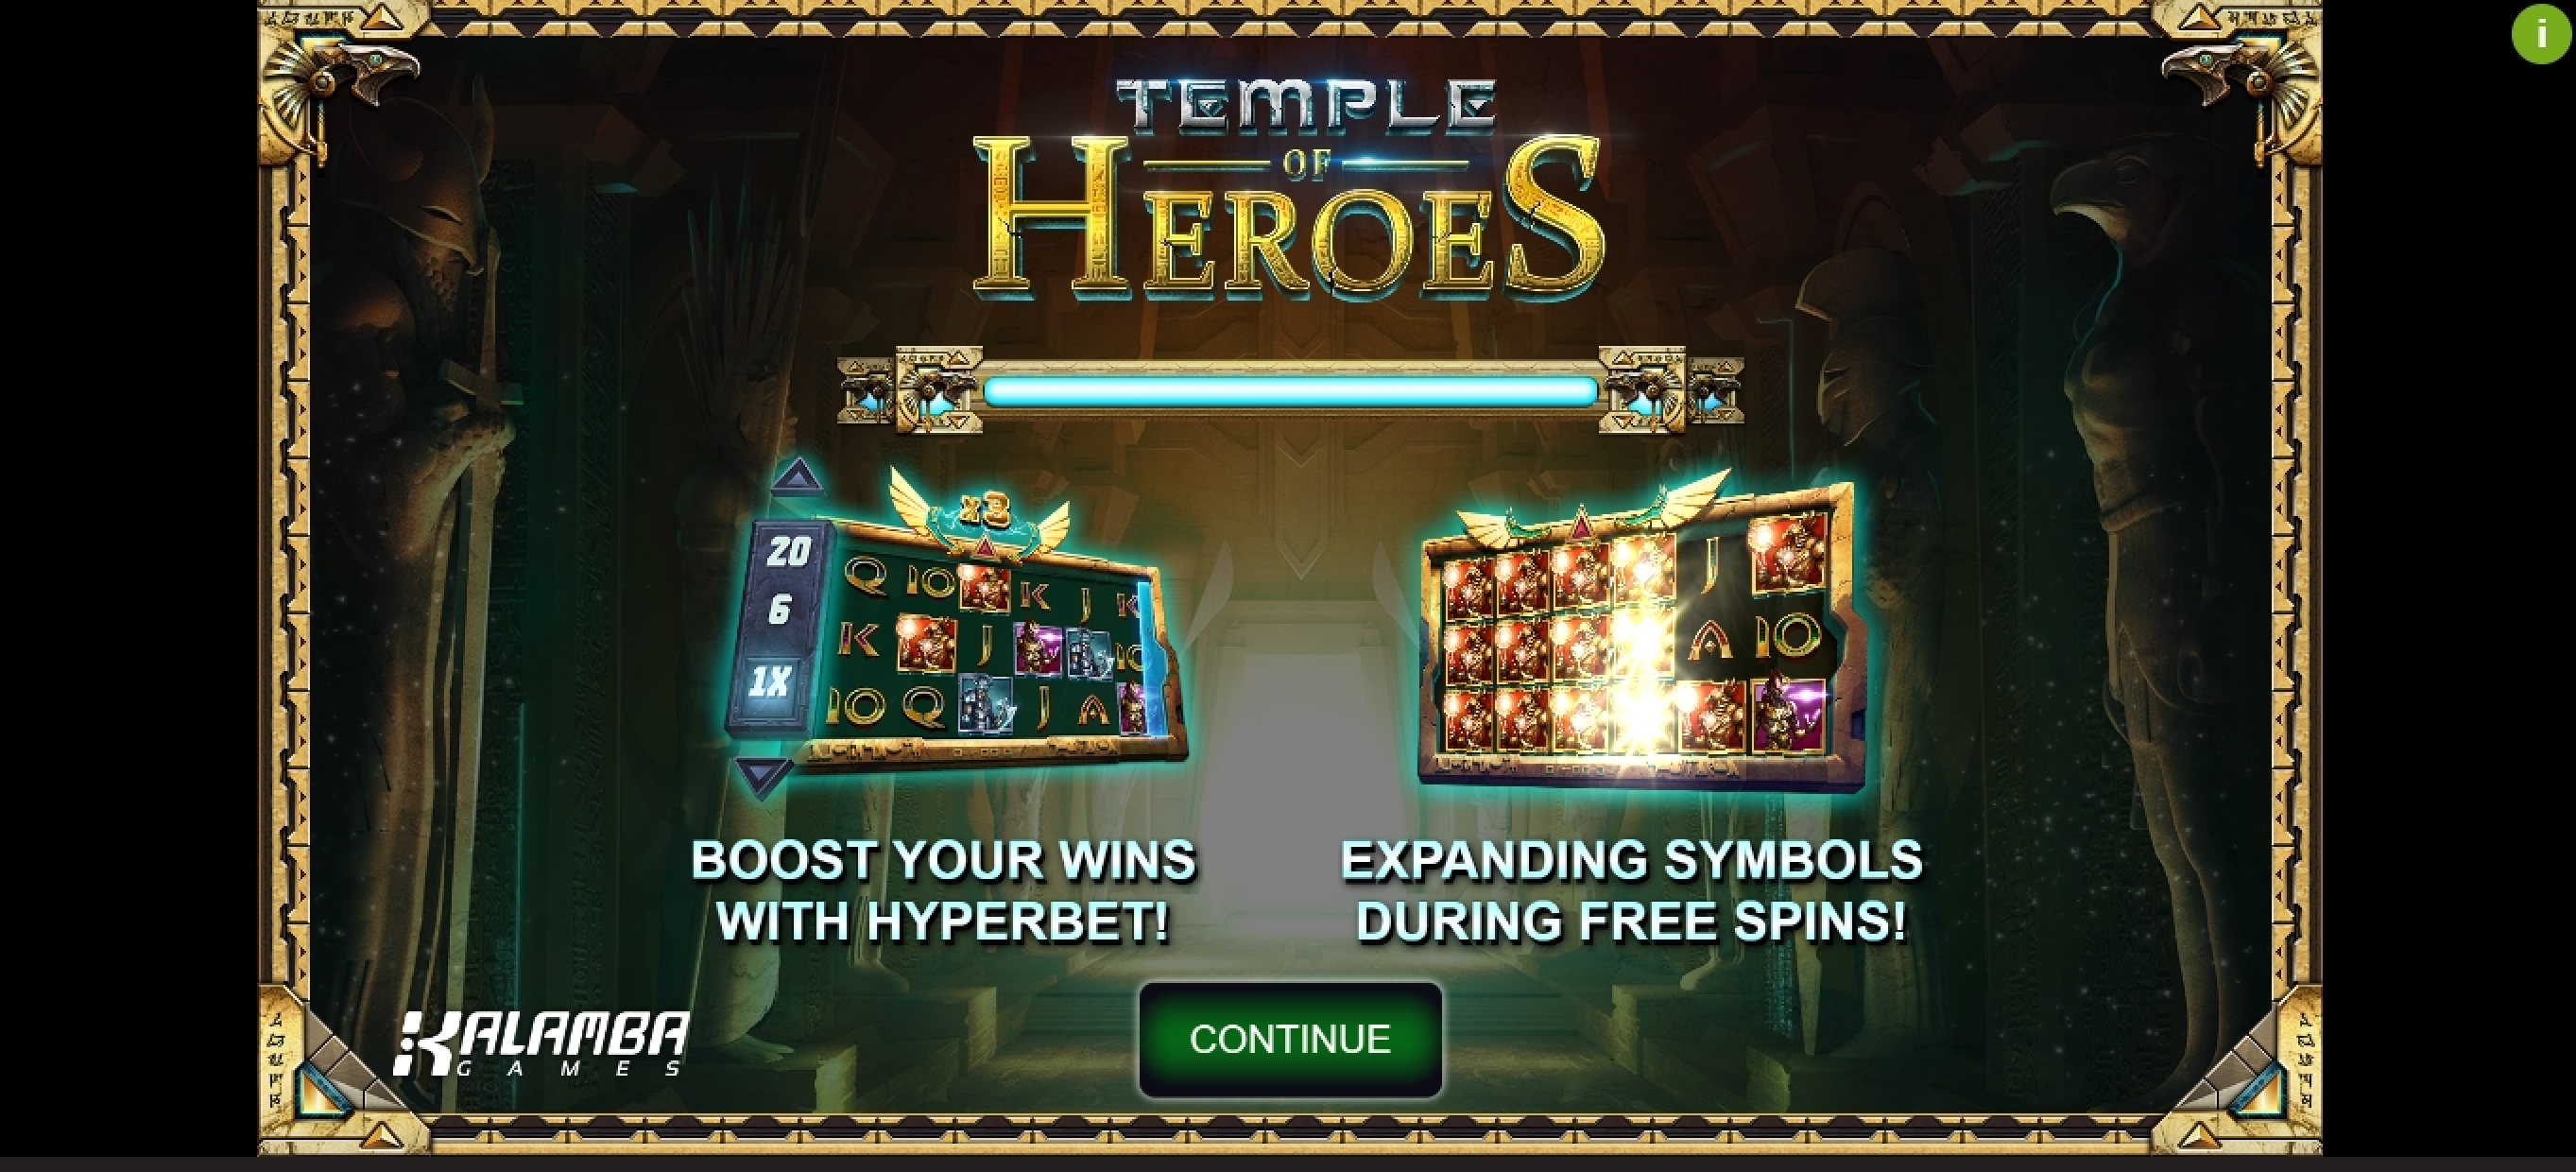 Play Temple of Heroes Free Casino Slot Game by Kalamba Games